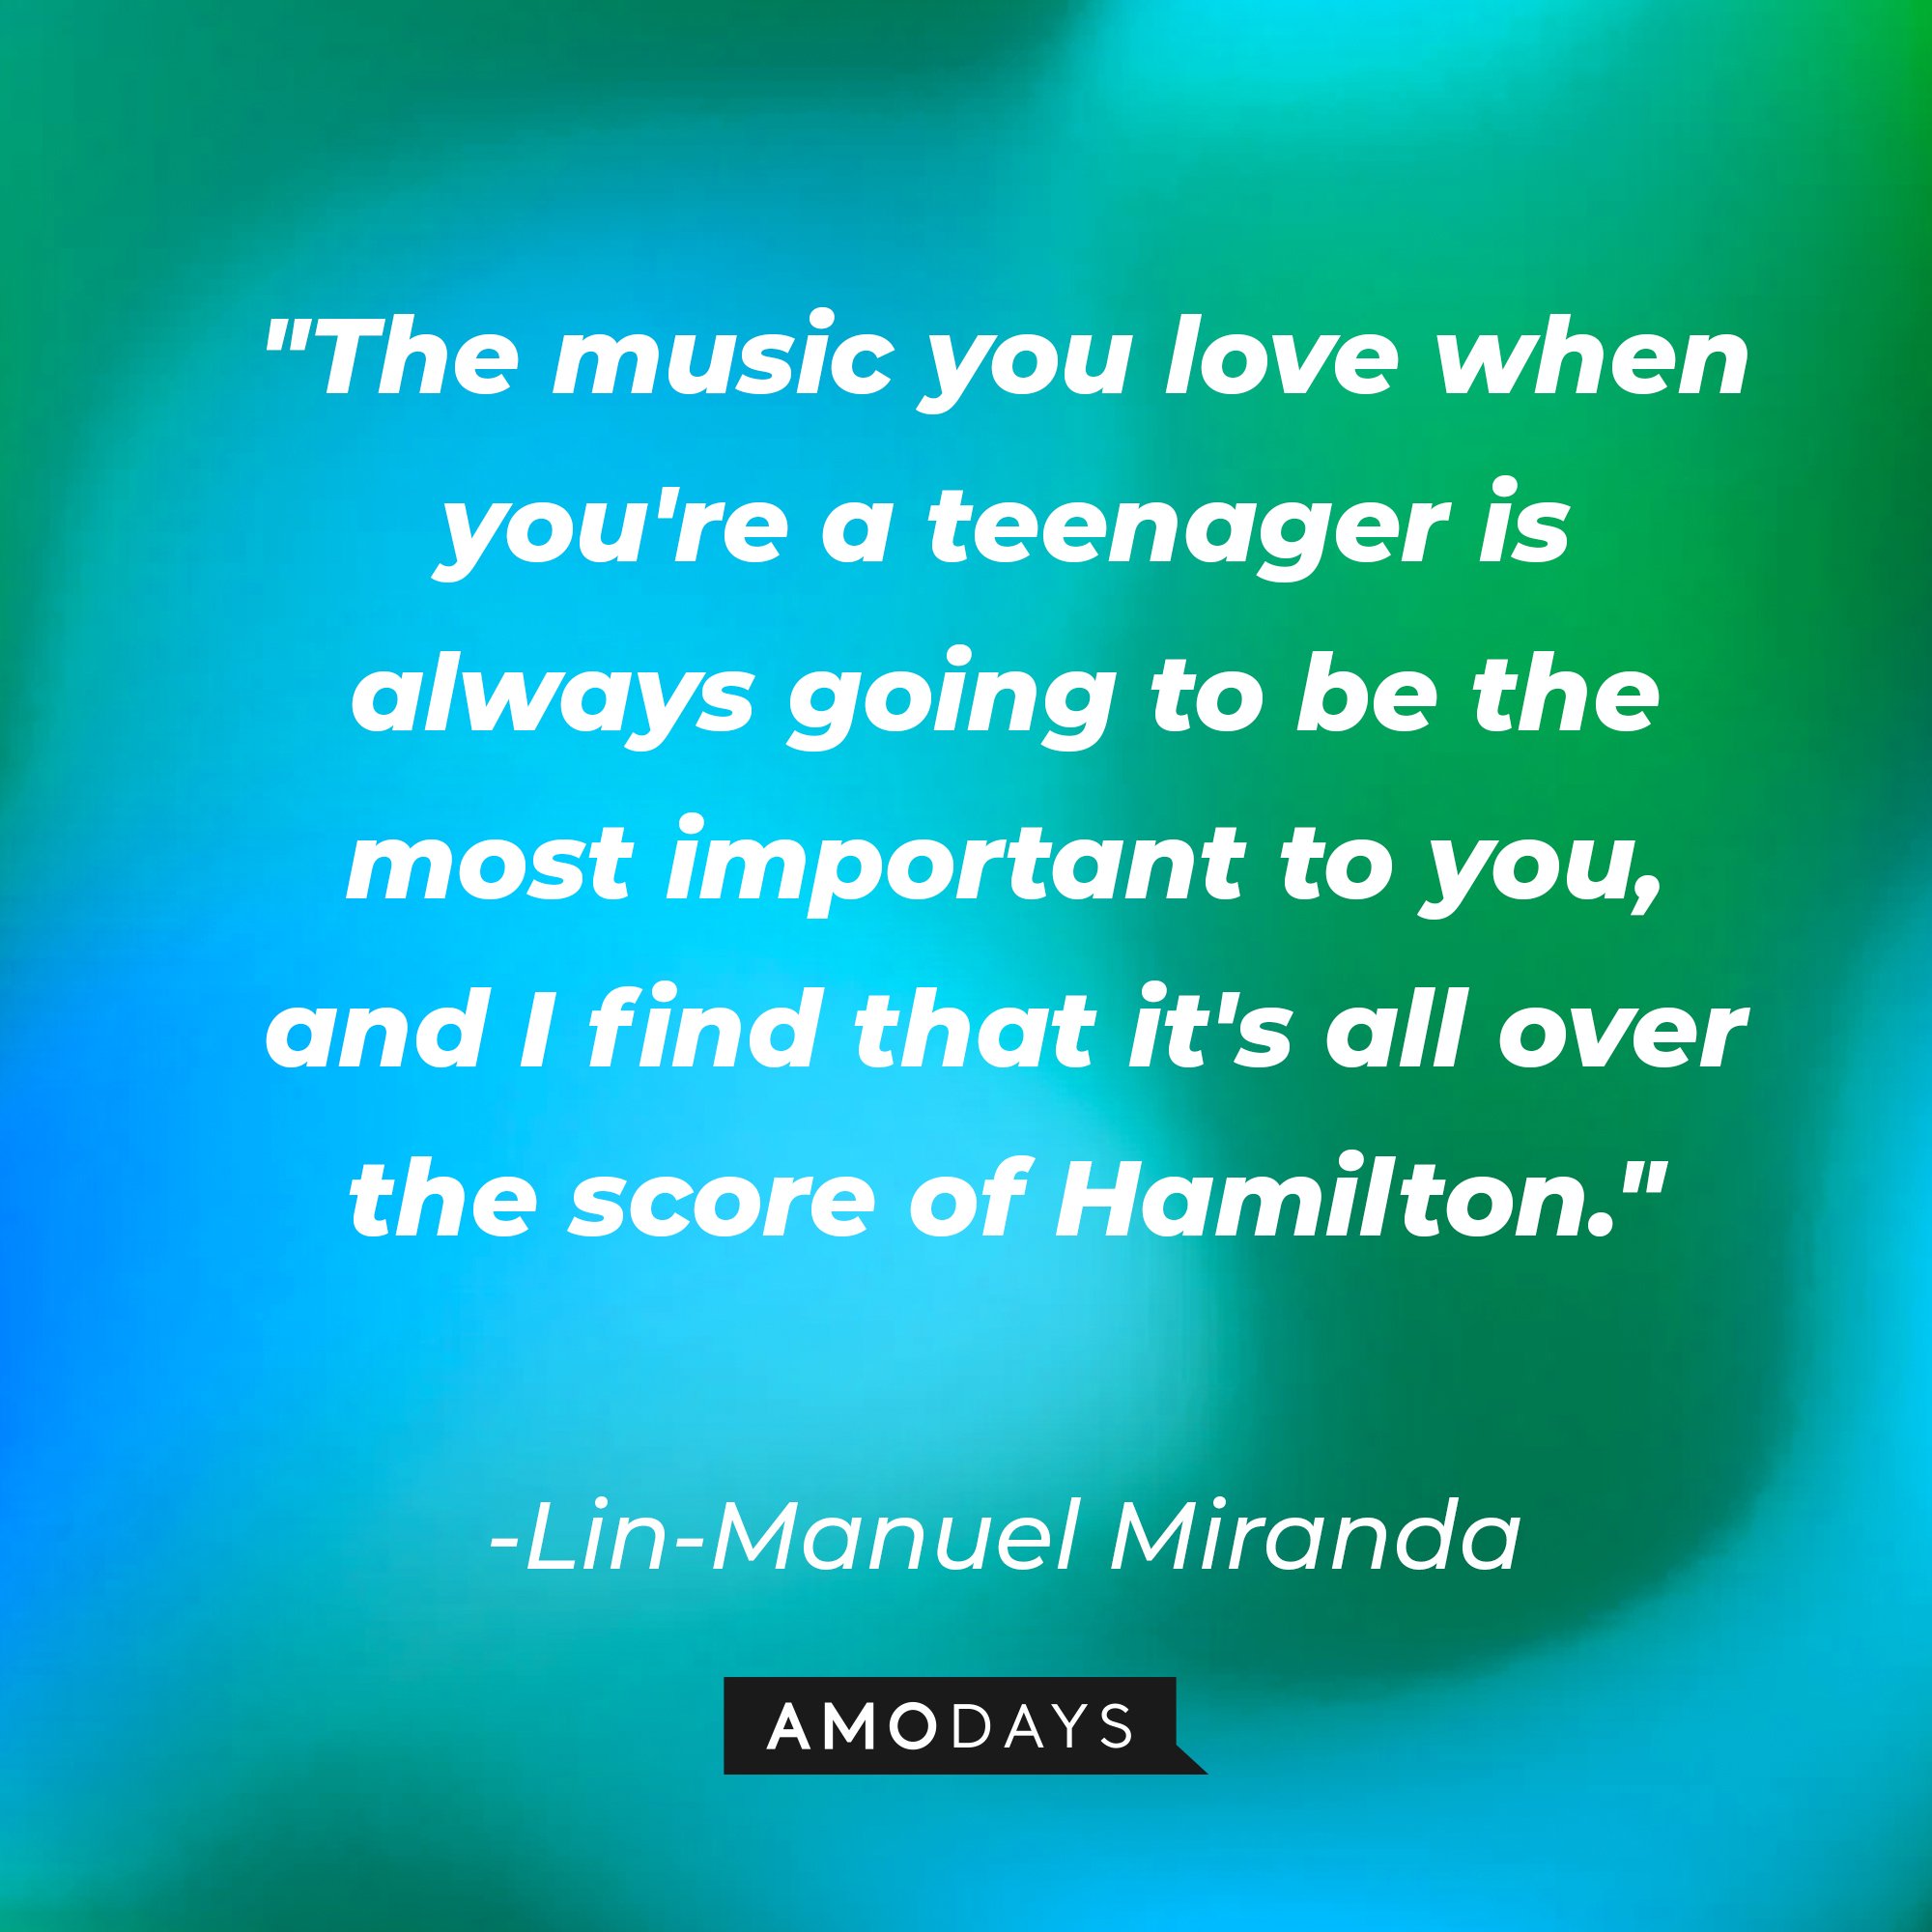 Lin-Manuel Miranda's quote: "The music you love when you're a teenager is always going to be the most important to you, and I find that it's all over the score of Hamilton." | Image: AmoDays